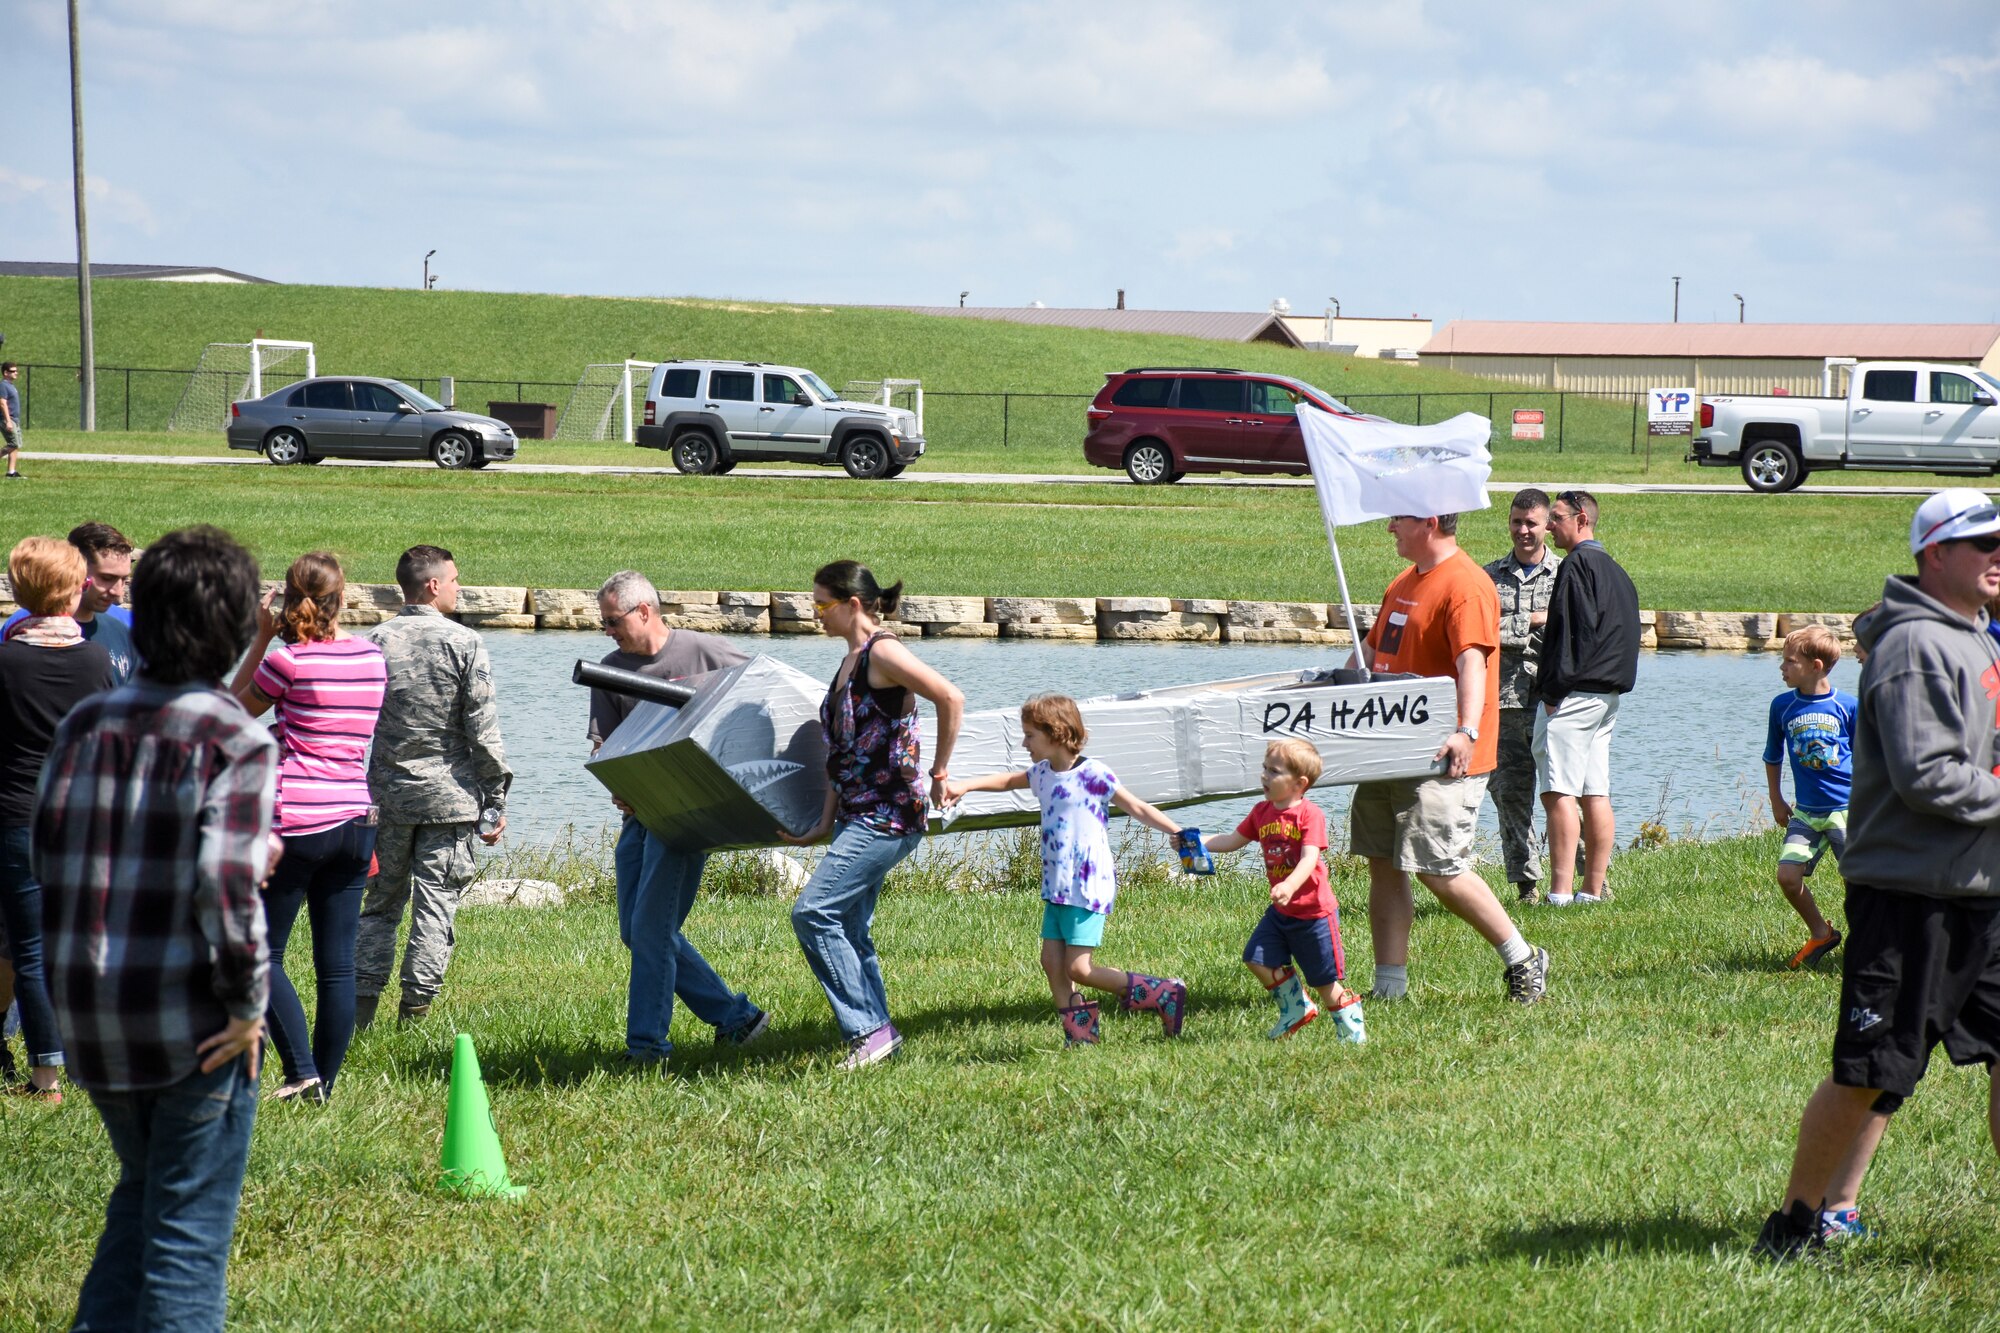 The winning boat from the Carboard Regatta, "Da Hawg," is carried toward the water during the Family Day event Sept. 9, 2018, at Ike Skelton Park on Whiteman Air Force Base, Mo.